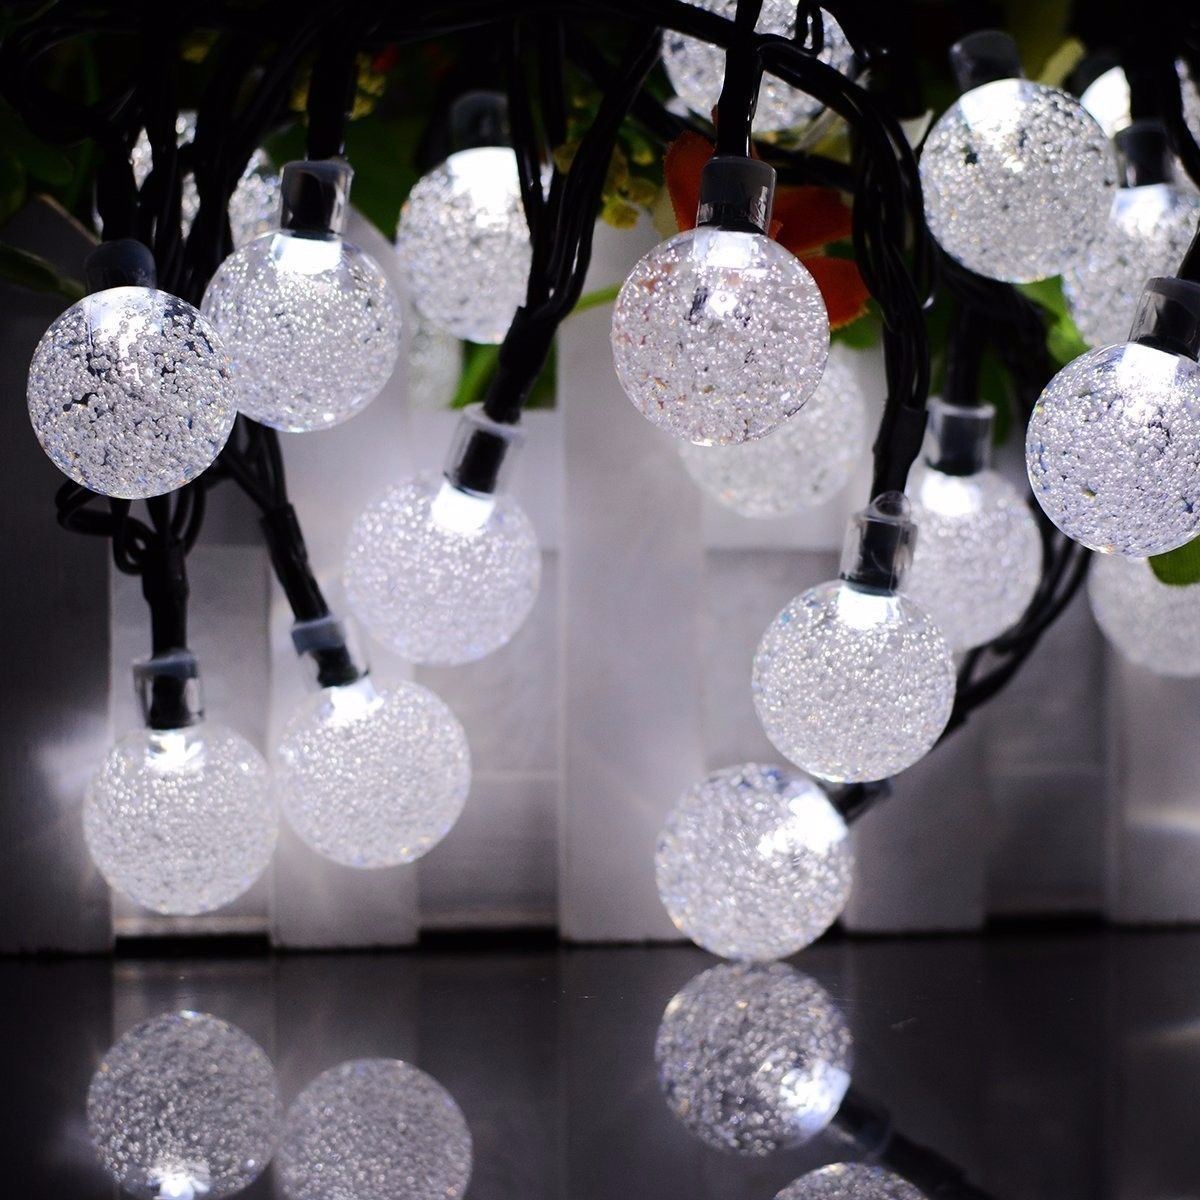 20ft 30 LED Solar String Ball Lights Outdoor Waterproof Garden Decor Cold White - image 2 of 3